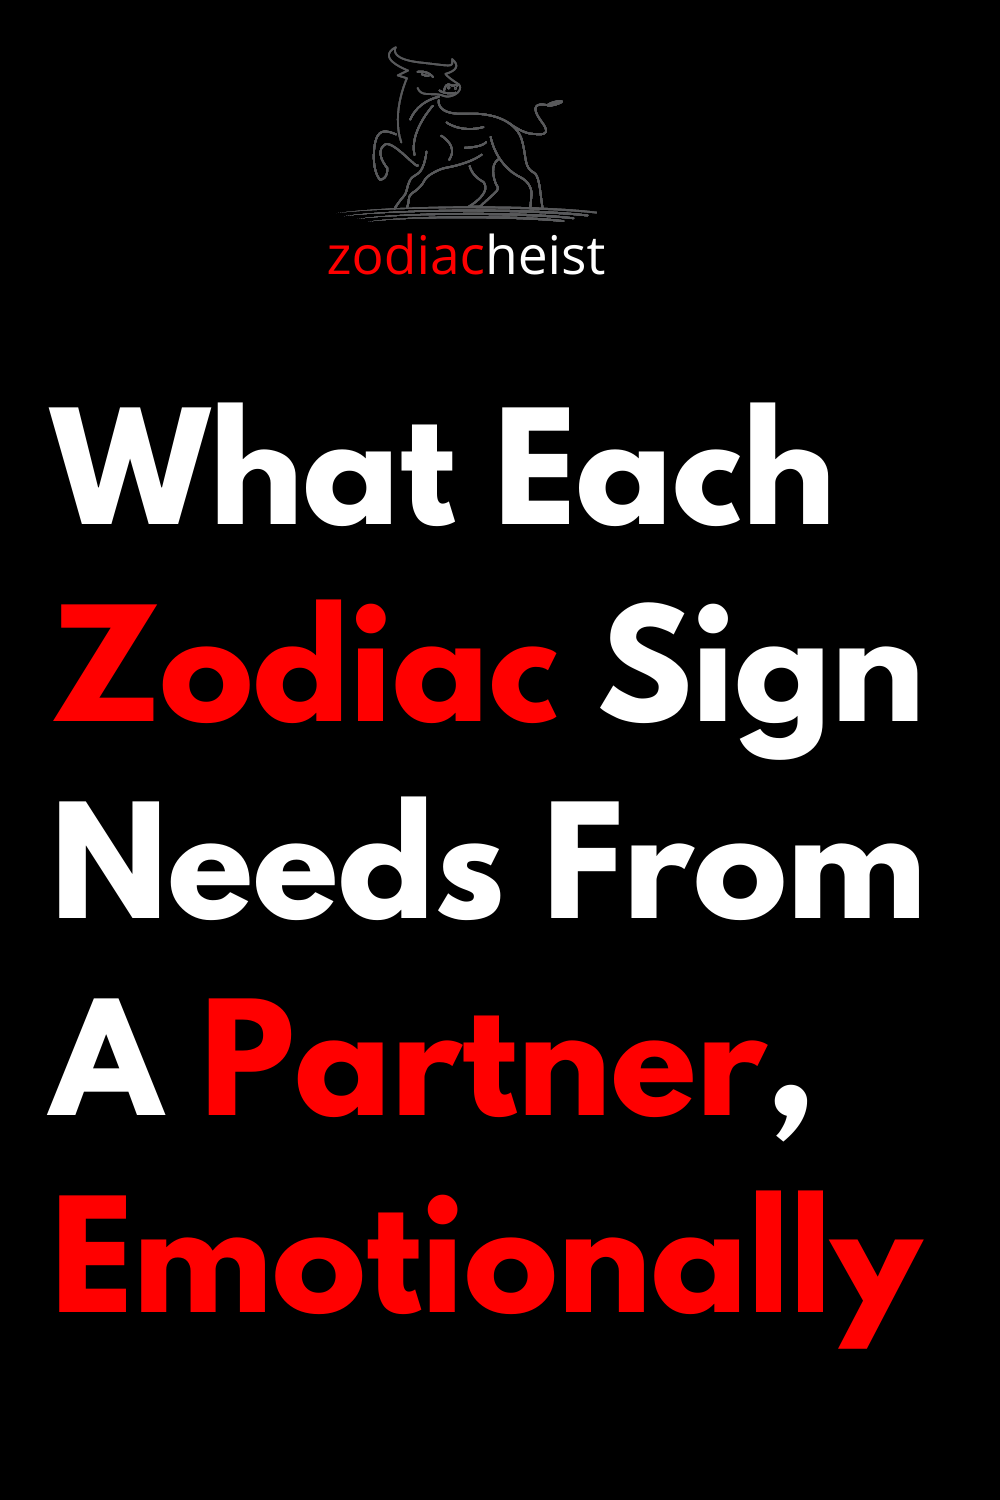 What Each Zodiac Sign Needs From A Partner, Emotionally